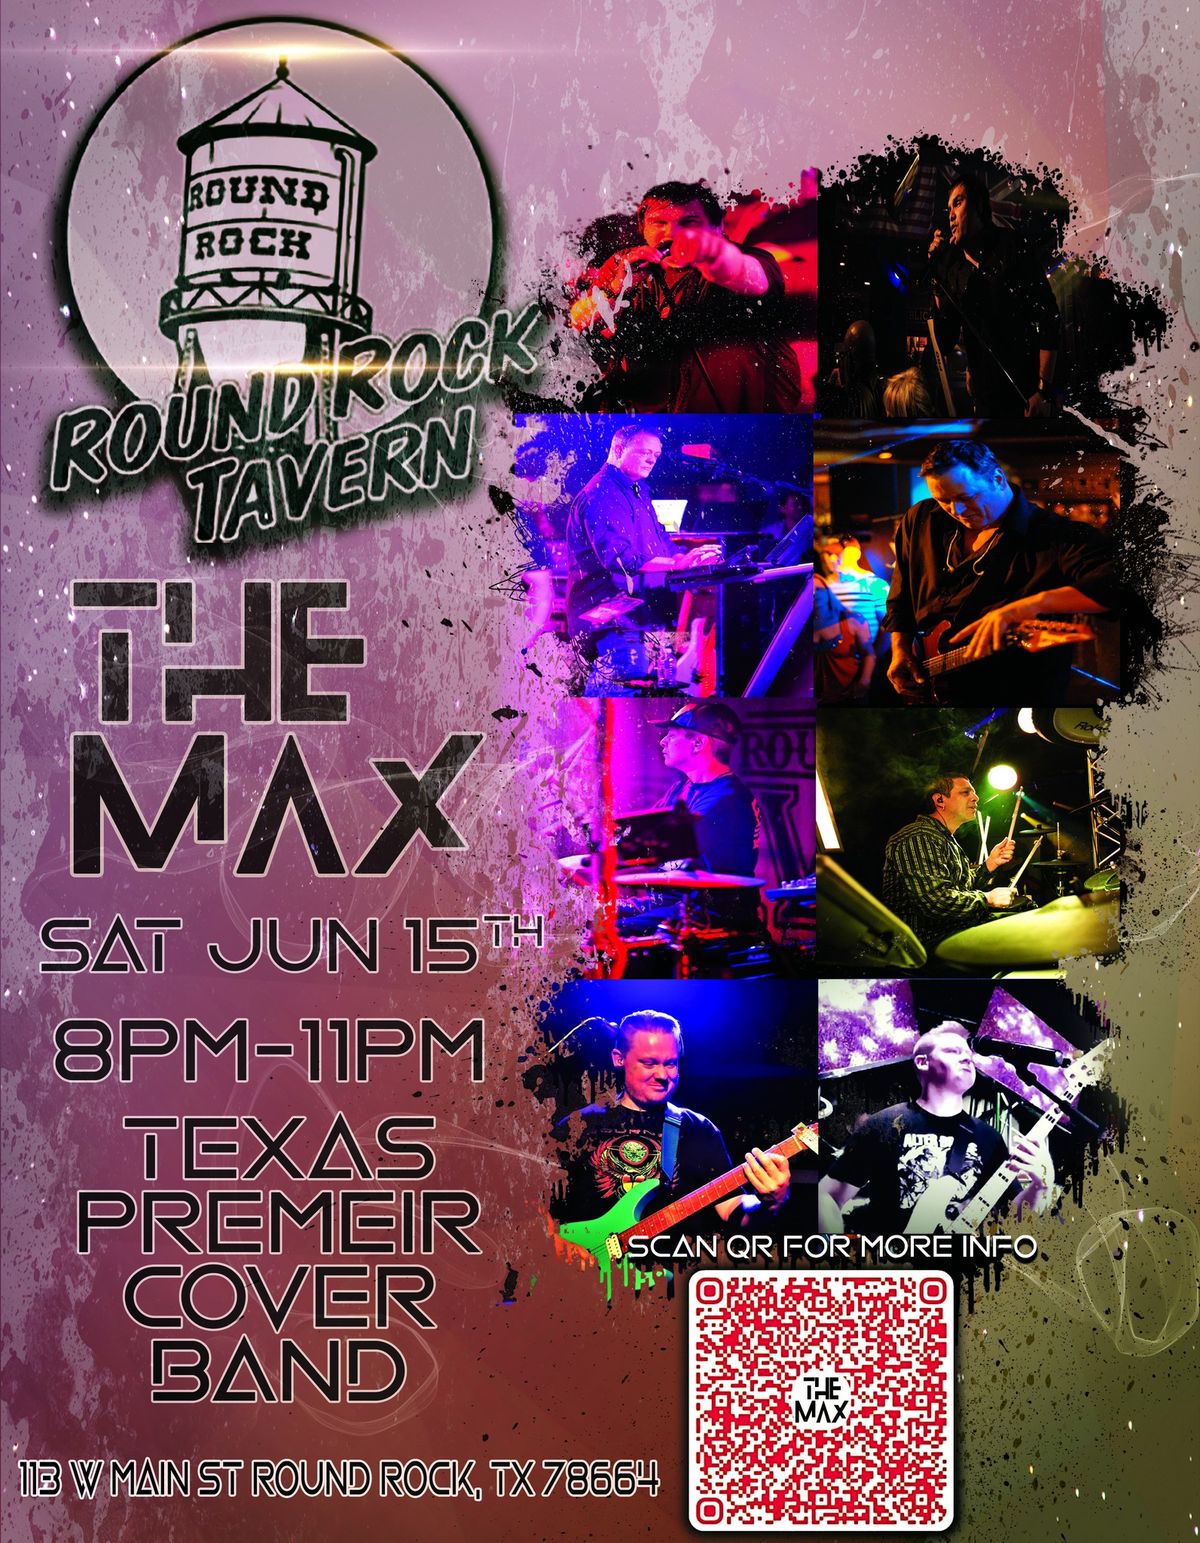 Round Rock's Rockin with The Max Saturday June 15th! 8pm to 11pm! Come out! Always a BLAST!